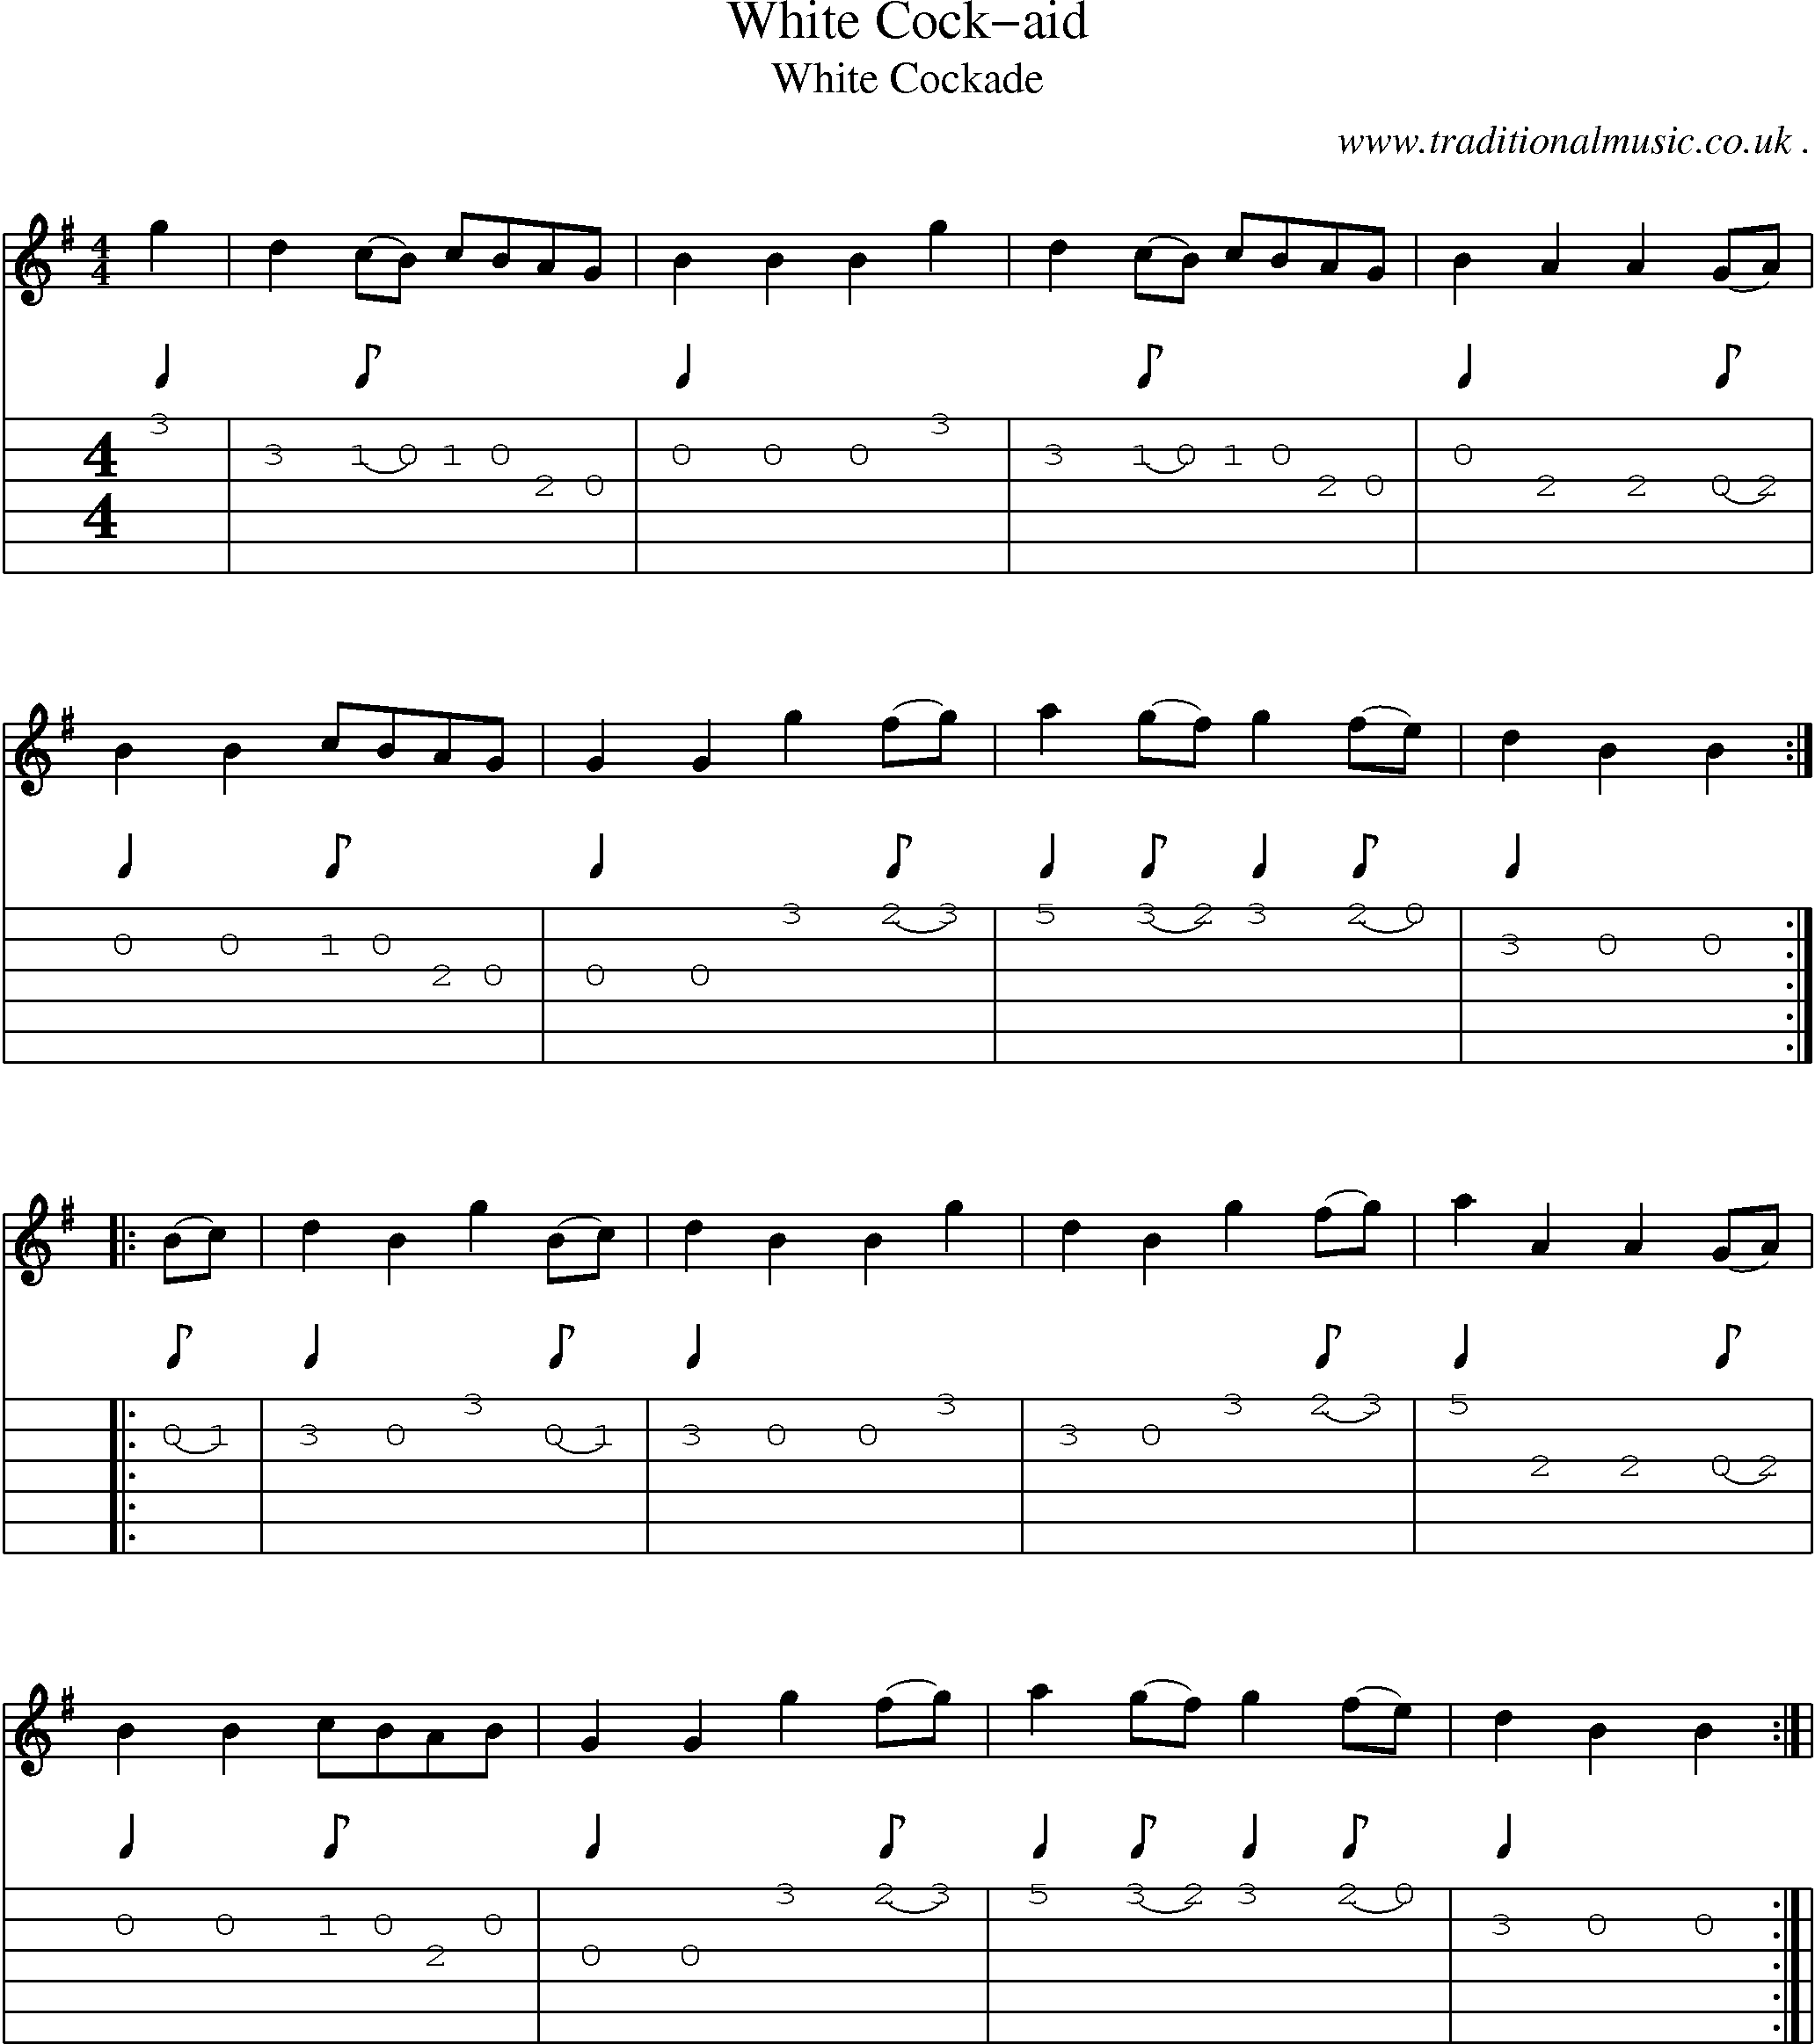 Sheet-Music and Guitar Tabs for White Cock-aid